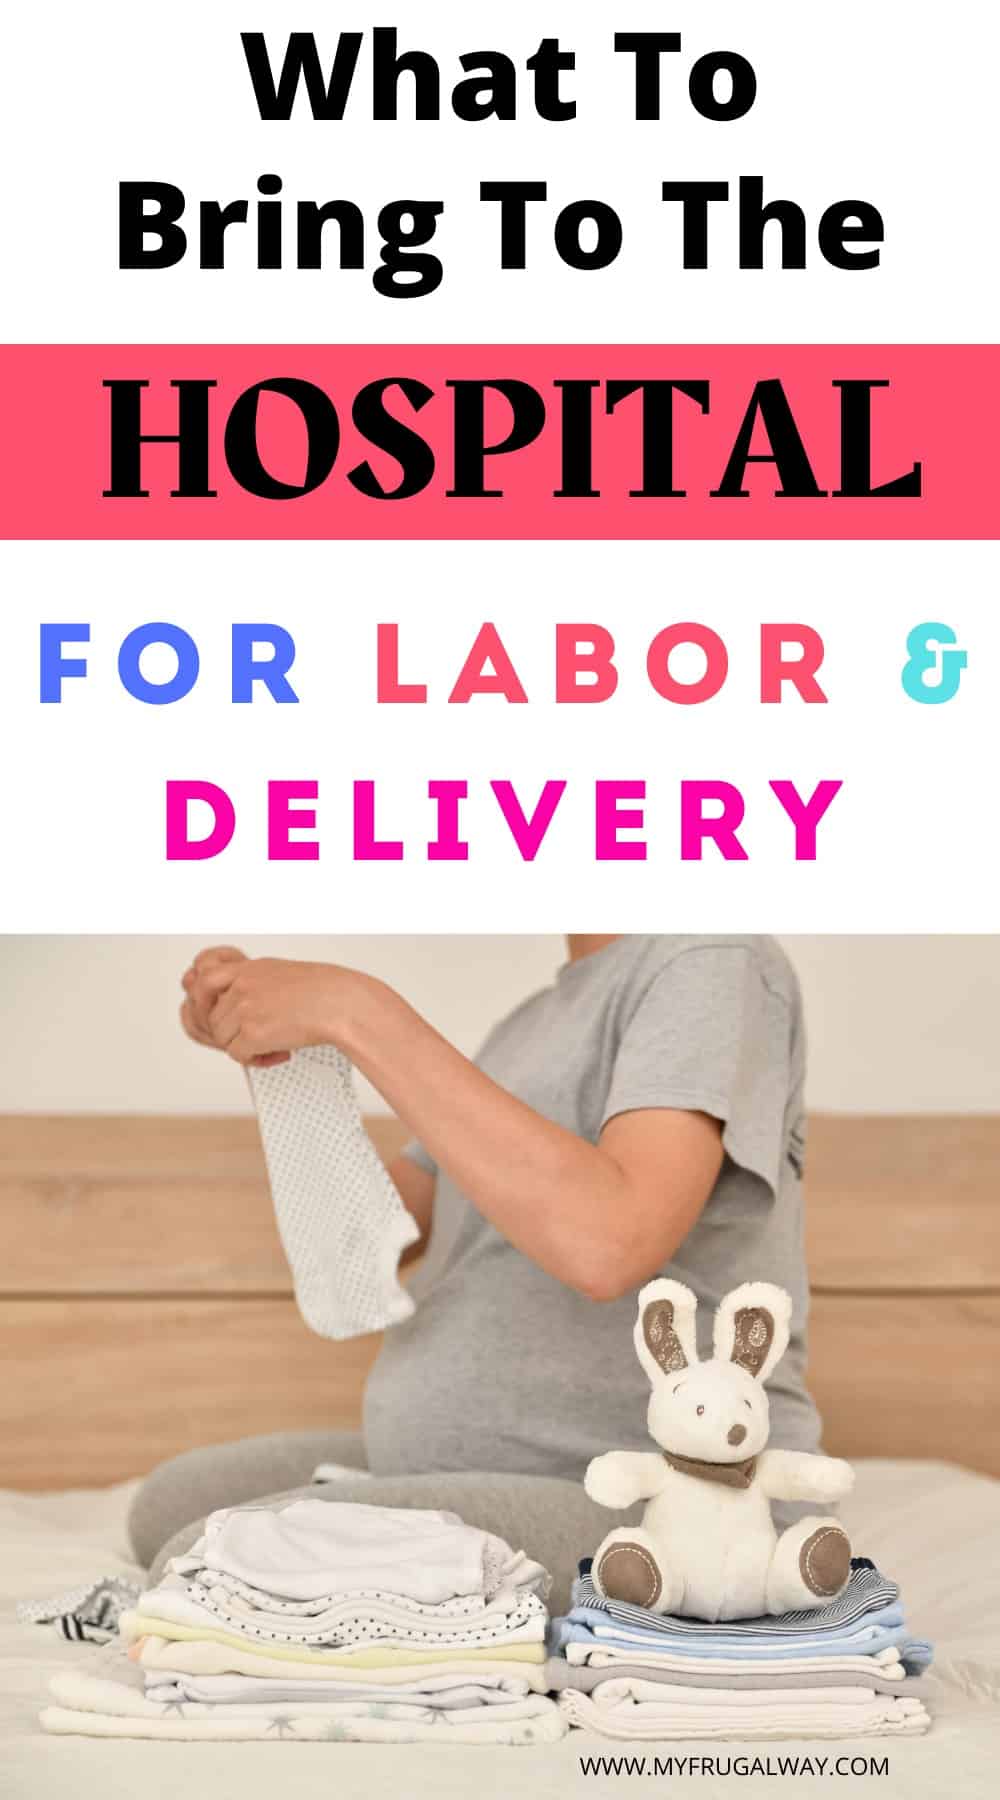 Is this your first pregnancy and you are a first time mom not sure what to pack in the hospital bag for labor and delivery. Read this post to find our what I wish I packed in my hospital bag and hospital bag Must Haves for Mom and Baby and for dad men too. #pregnancy #momtobe #newborn #laboranddelivery #baby